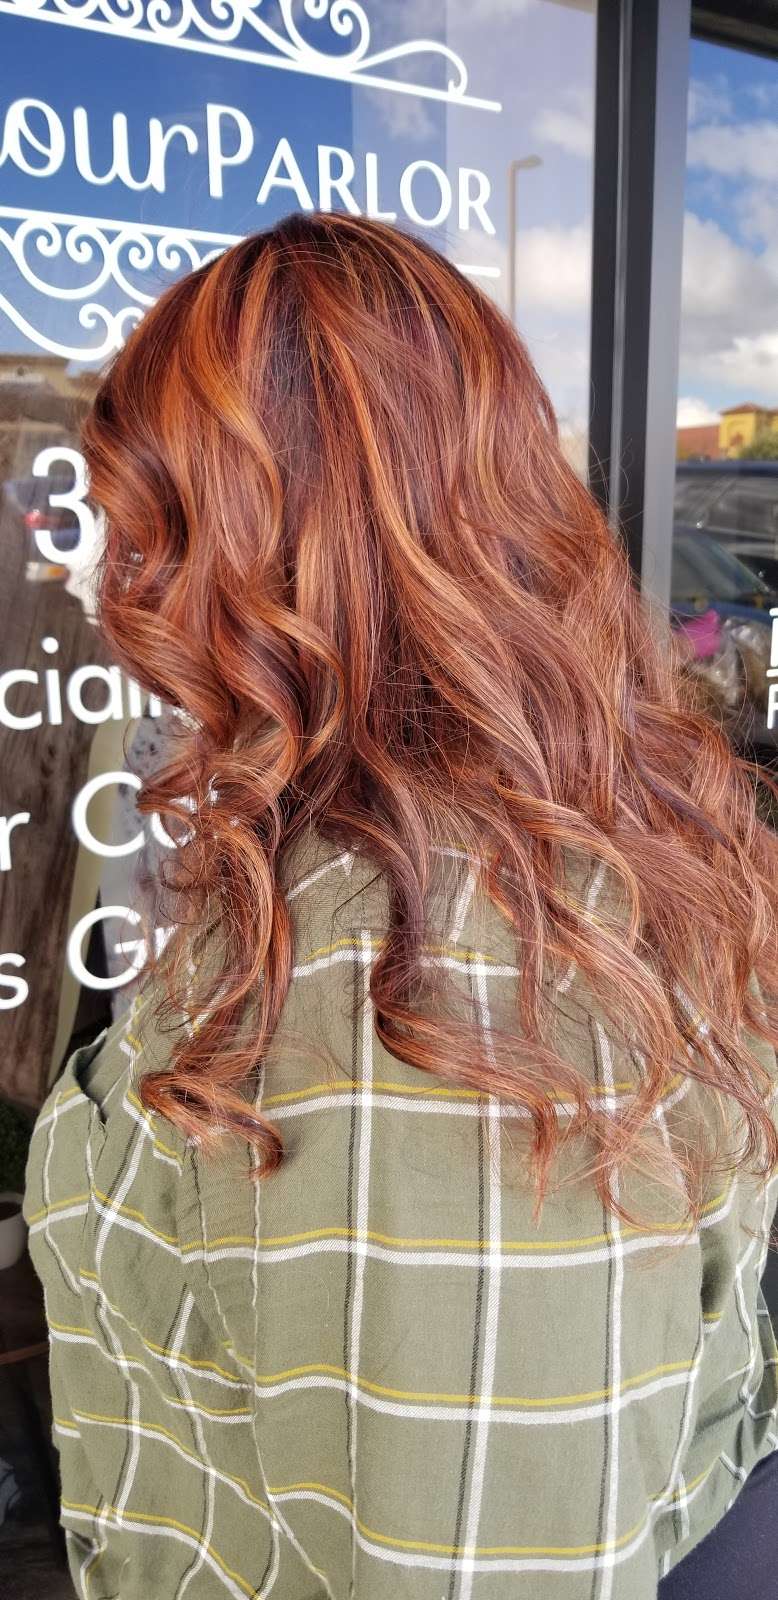 The Colour Parlor/Christine Withers | 32395 Clinton Keith Rd #A103, Wildomar, CA 92595, USA | Phone: (714) 497-9343